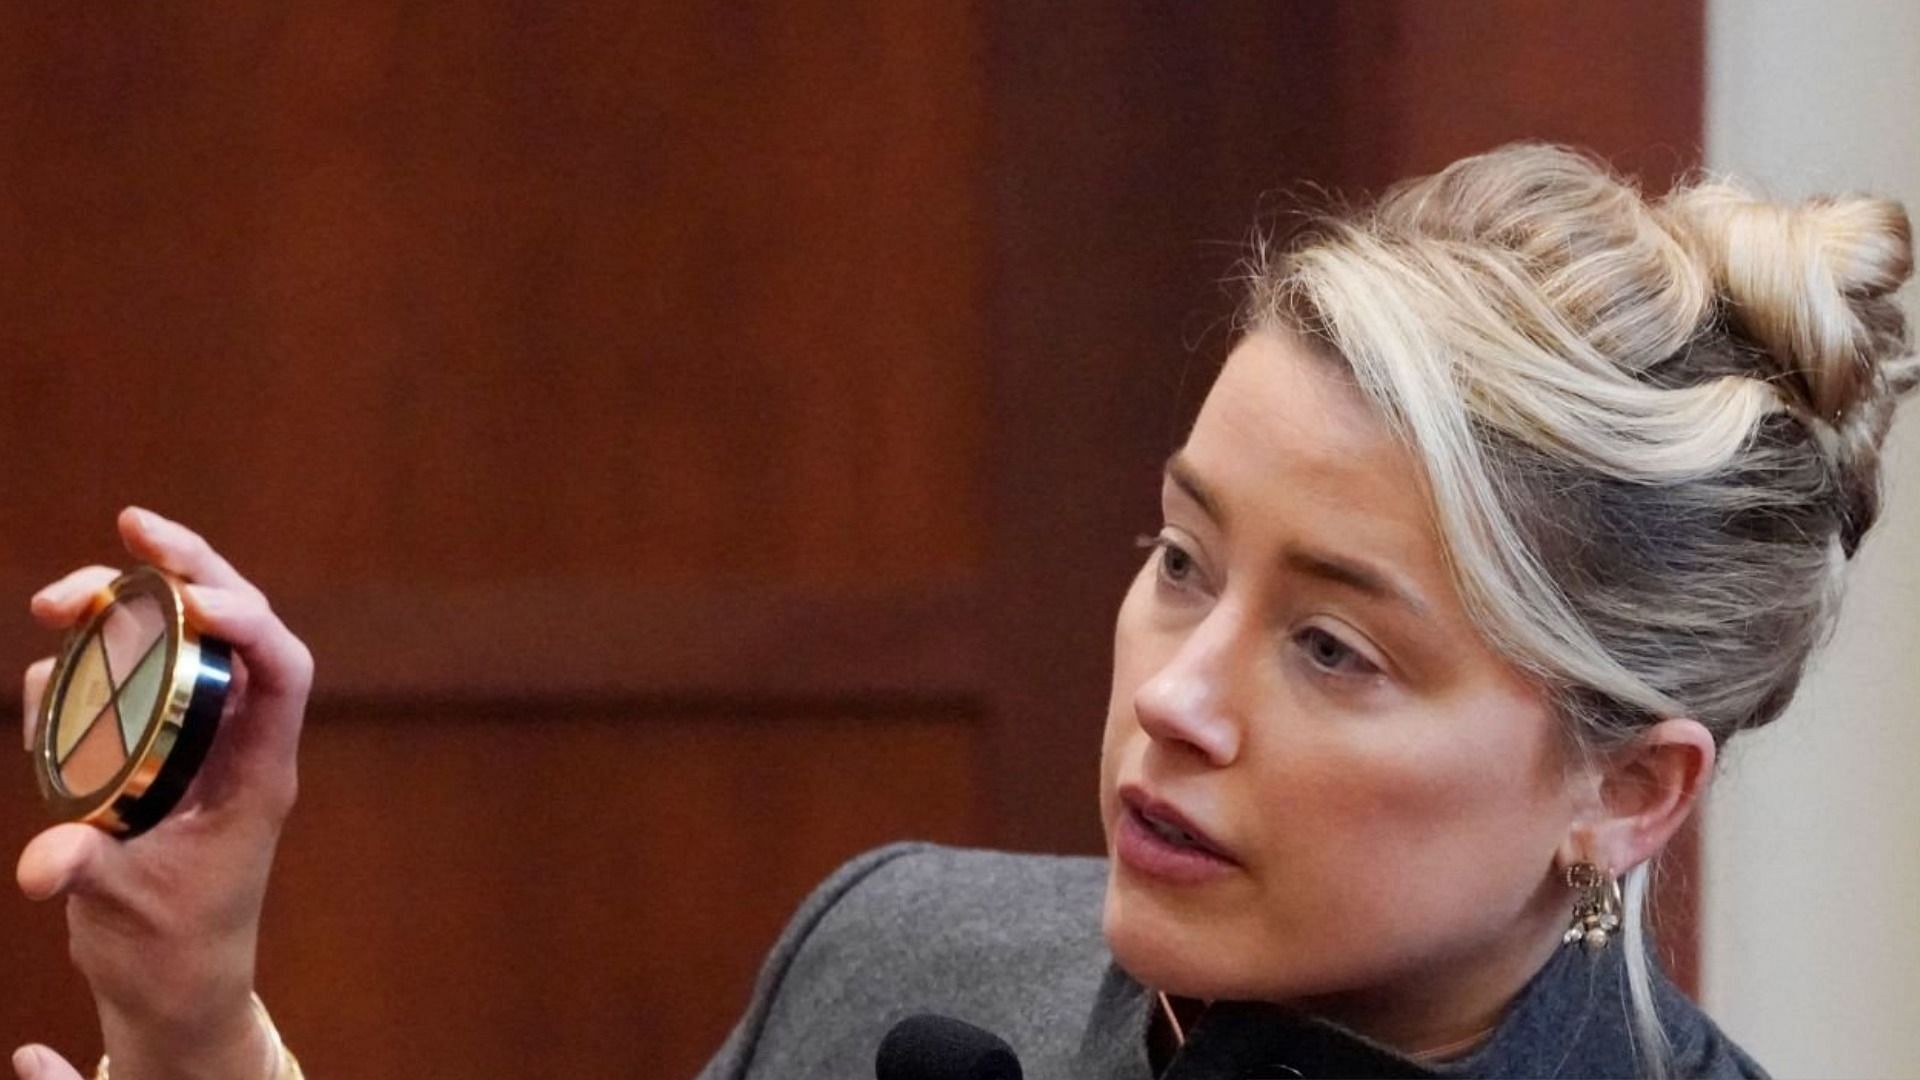 Amber Heard claimed that she had to use a bruise kit to cover up the wounds she endured from alleged Johnny Depp abuse (Image via Steve Helber/Getty Images)